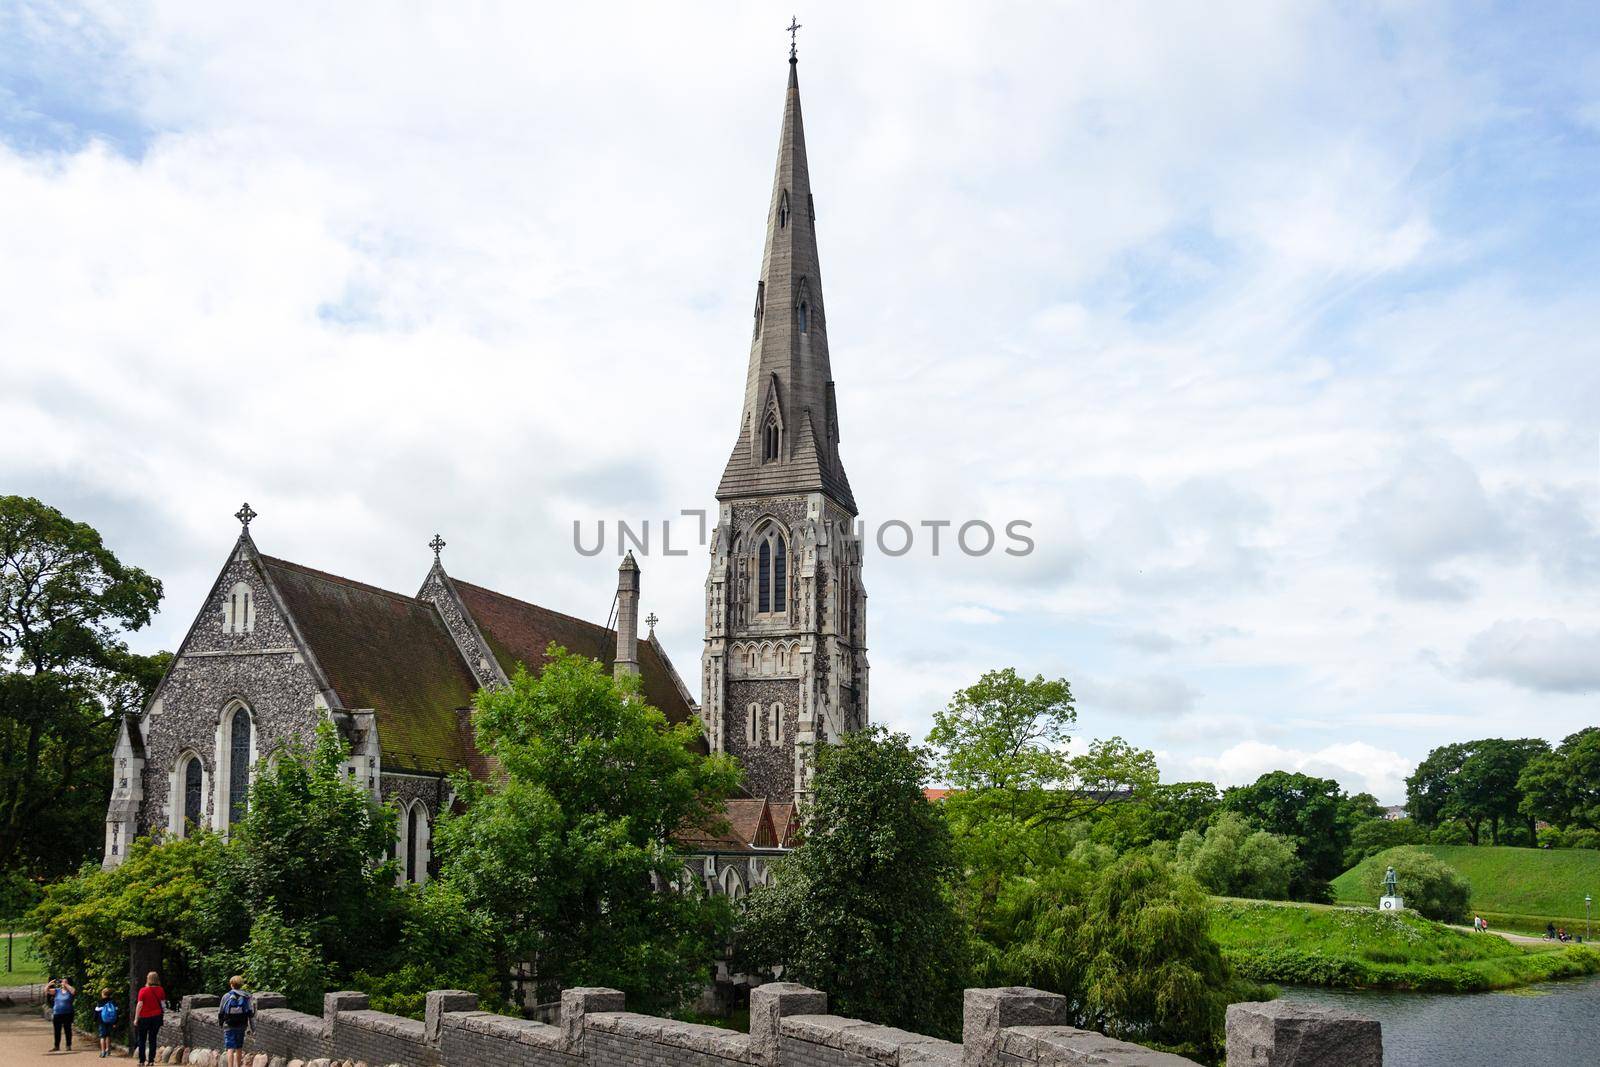 Copenhagen, Denmark - July 24, 2017: Tourists visiting famous St Albans Anglican Church in Copenhagen.  Church designed by Arthur Blomfield in Gothic Revival style and built in 1887.